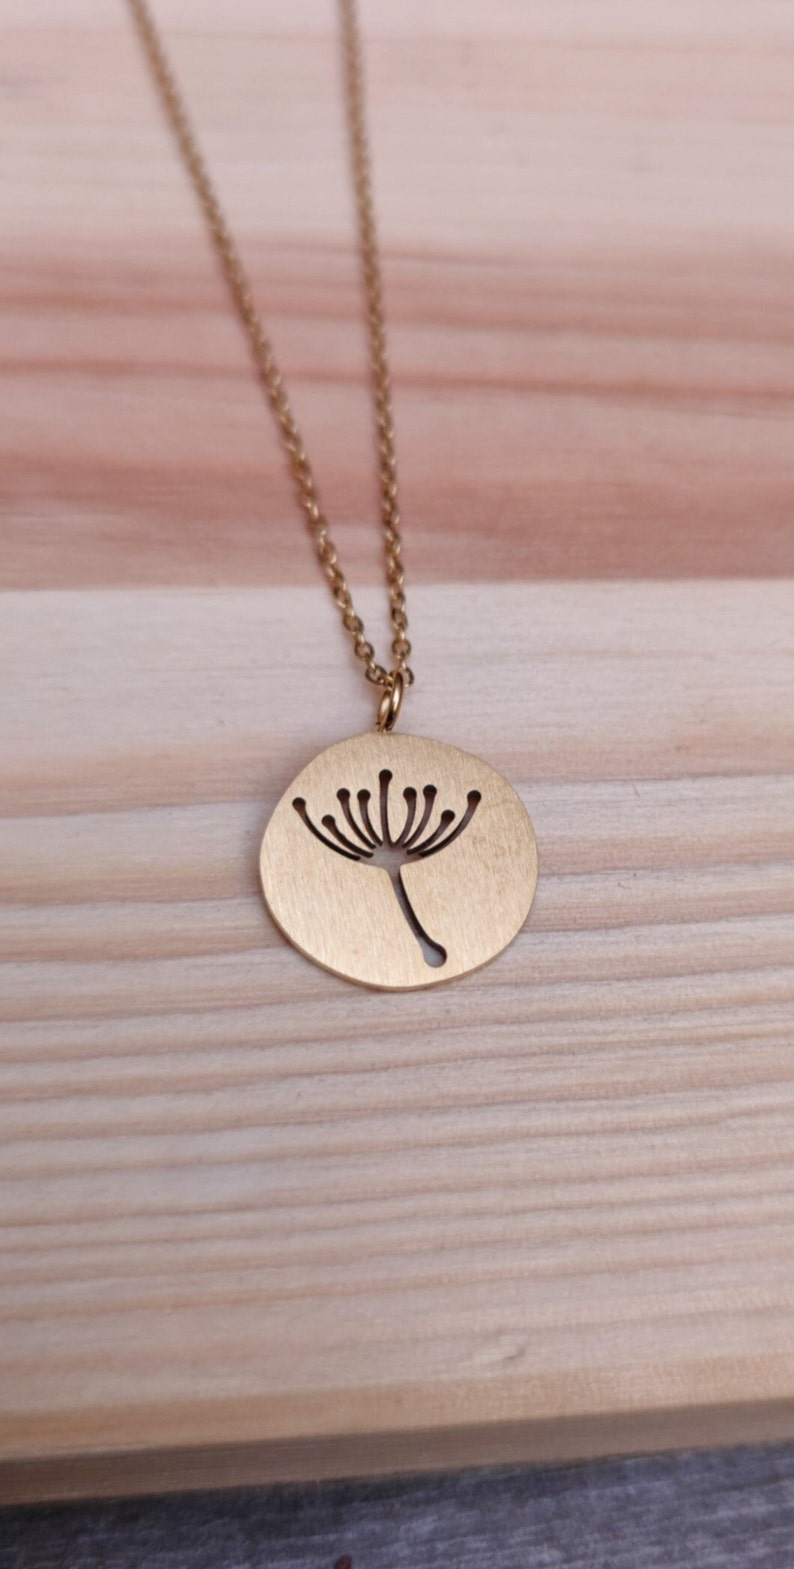 Pusteblume Necklace charm necklace, minimalist jewelry, dainty necklace, minimal statement necklace, pendant necklace, gift for girlfriend image 1